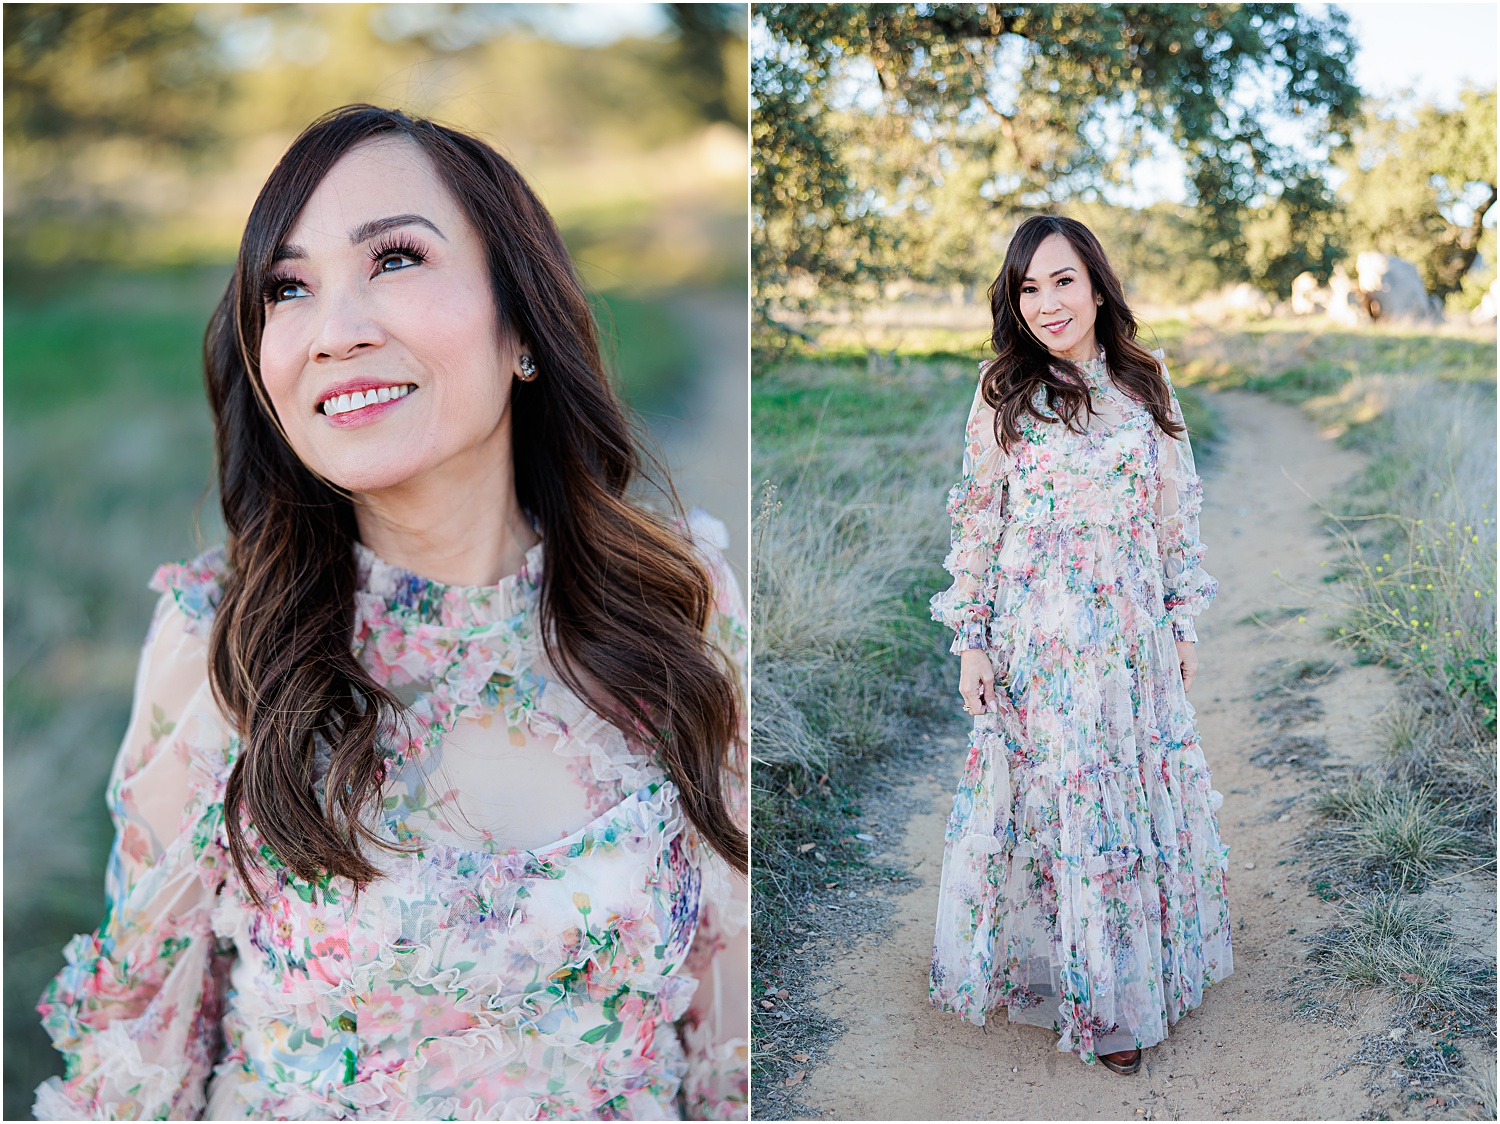 Elegant and Whimsical 50th Birthday Photo Session